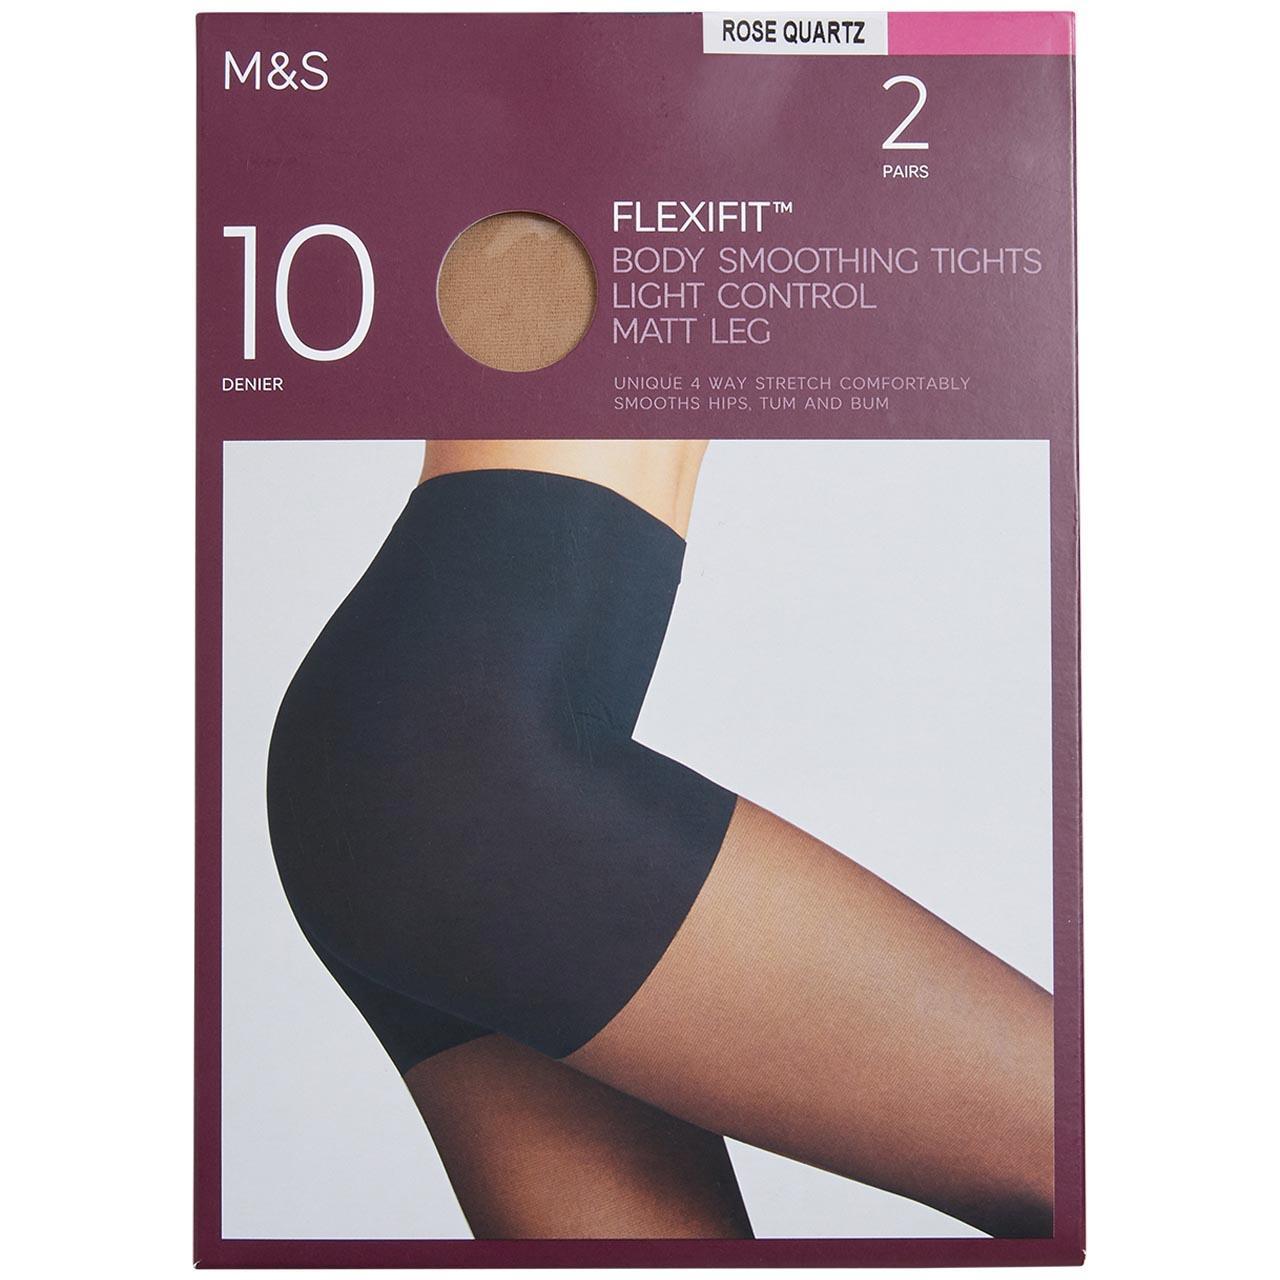 2 Pair Pack 10 Denier Body Smoothing Tights, M&S Collection